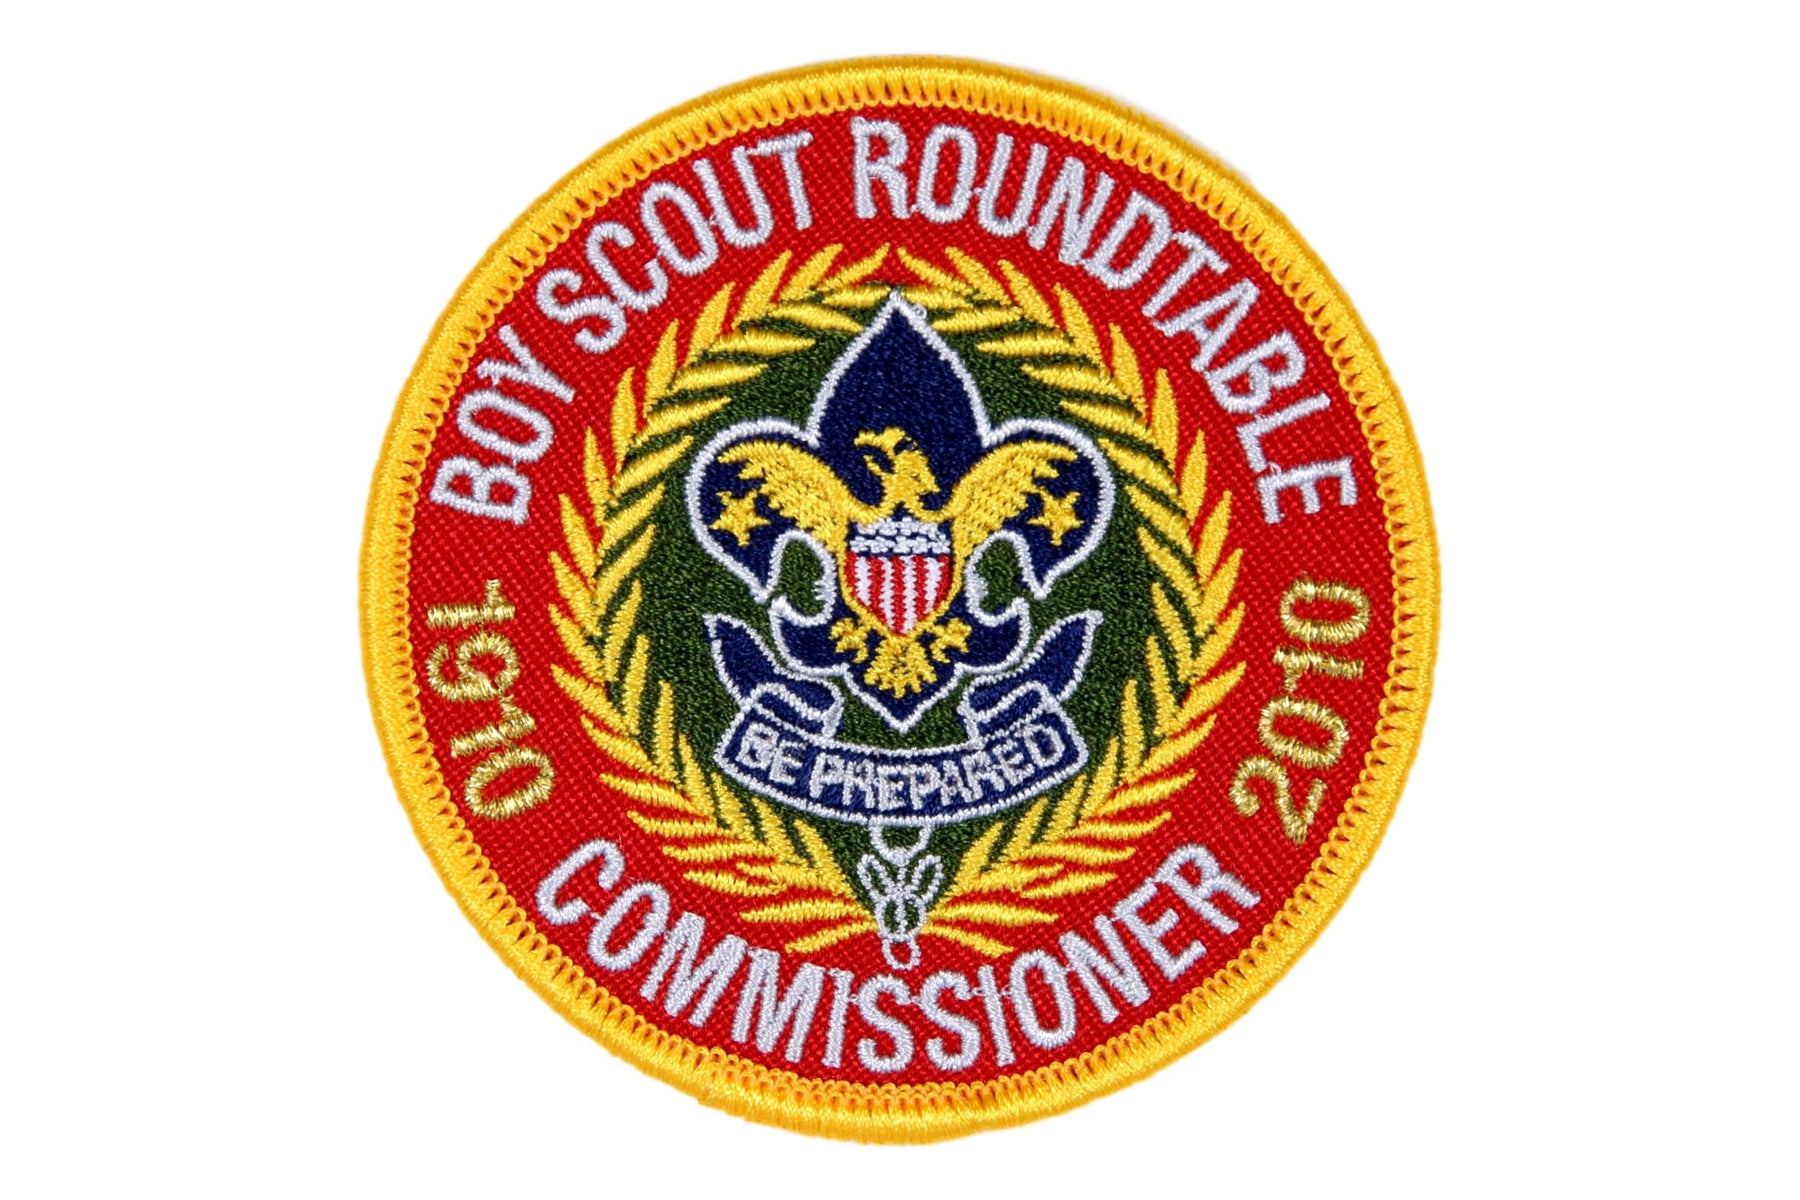 Boy Scout Roundtable Commissioner Patch 2010